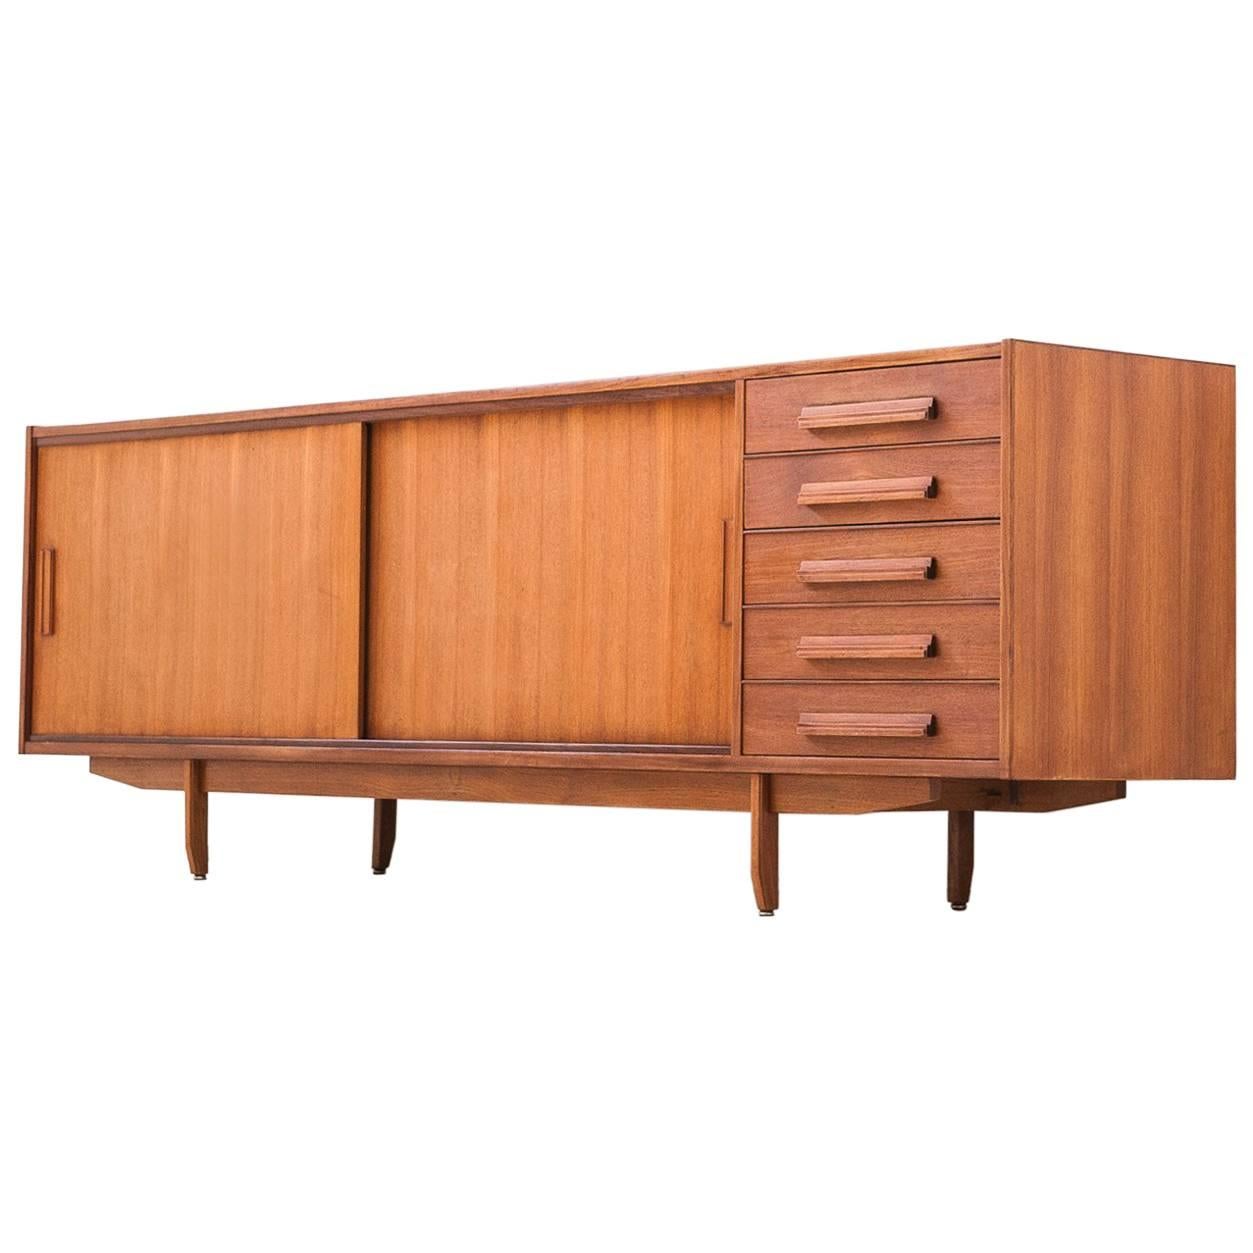 1950s mid century Modern Teak Sideboard with drawers and sliding doors